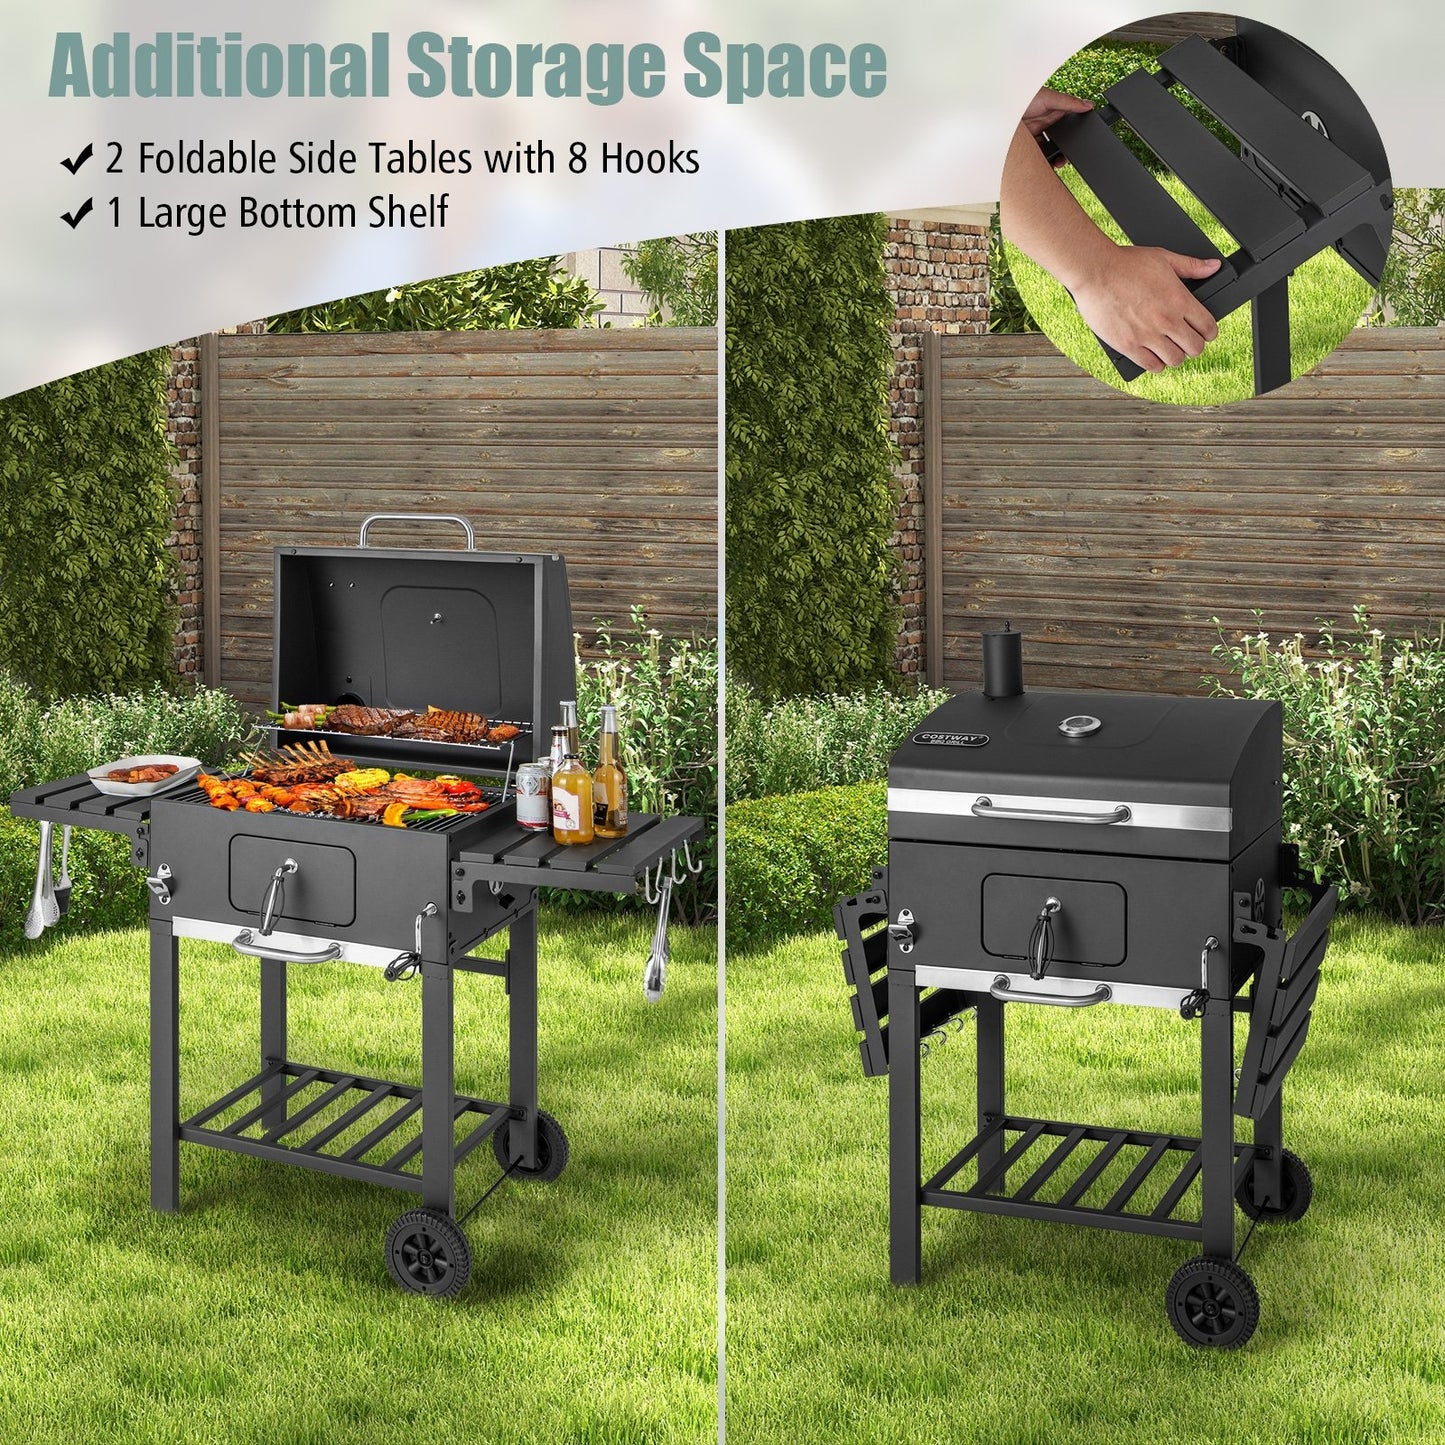 Outdoor BBQ Charcoal Grill with 2 Foldable Side Table and Wheels, Black